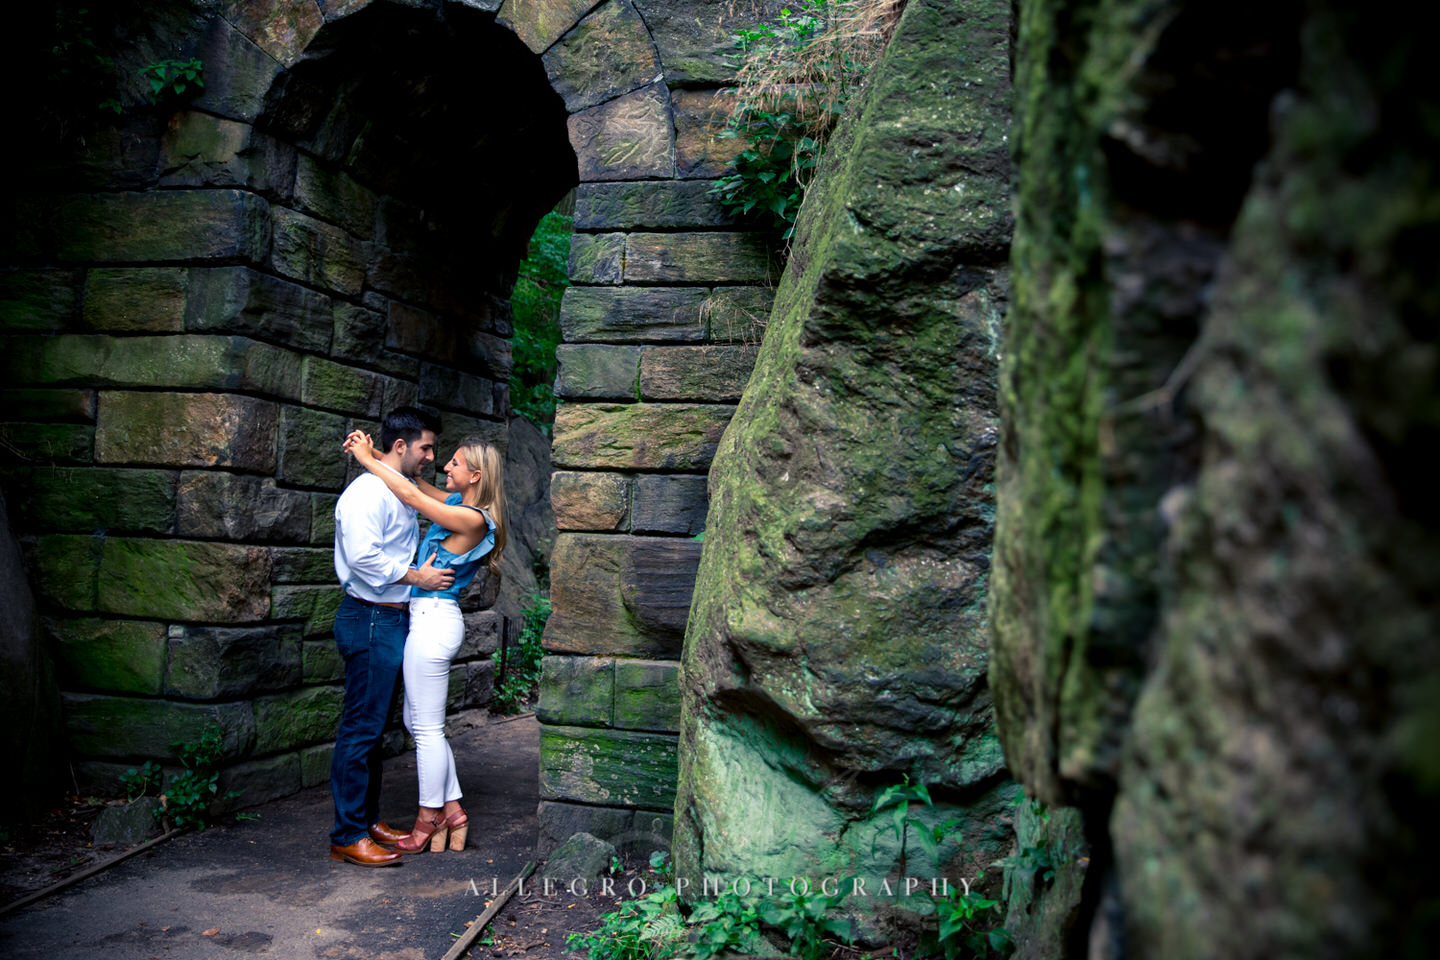 central park manhattan e-session photo by Allegro Photography